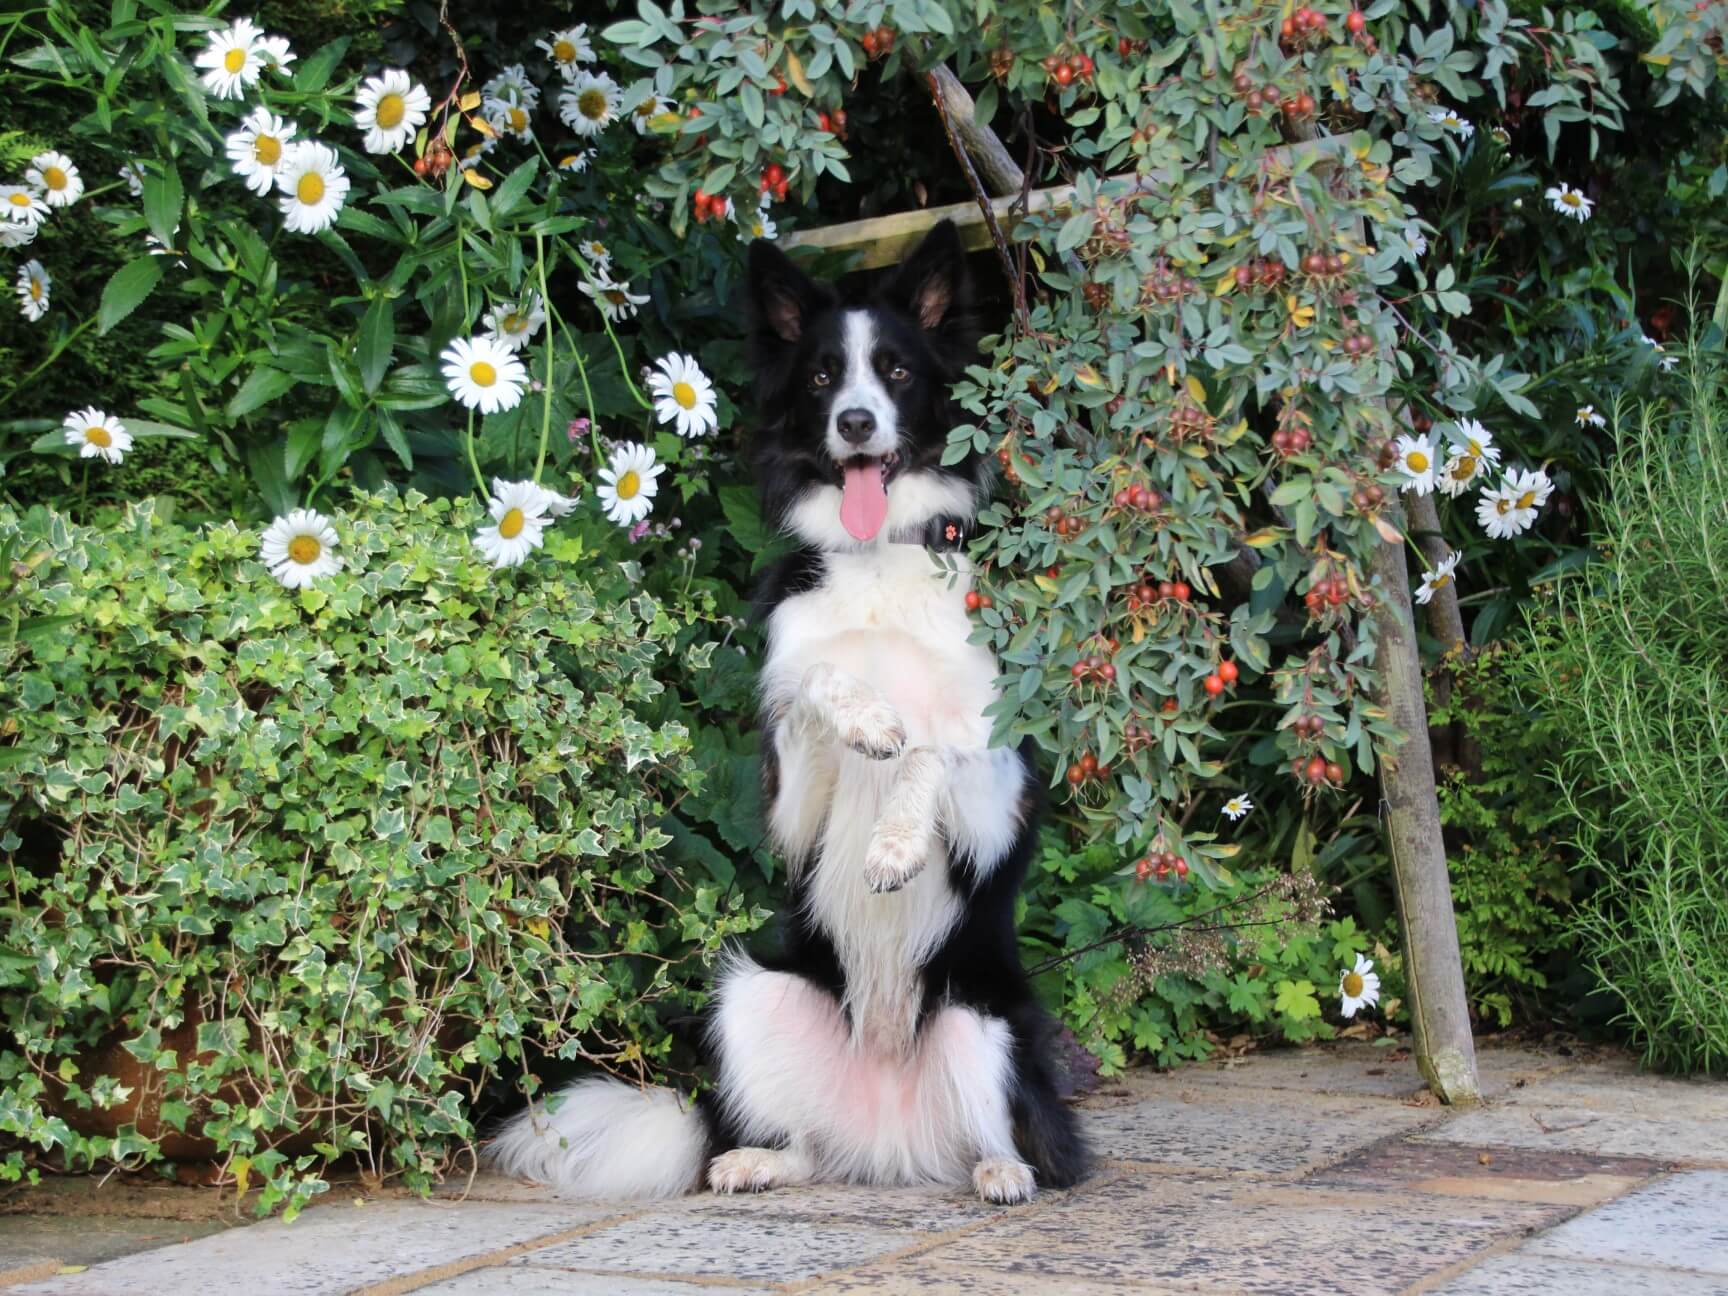 https://www.pitpat.com/wp-content/uploads/2020/08/Dog_-rights_MS_outdoors_stationary_-sitting-with-flowers_border-collie.jpg